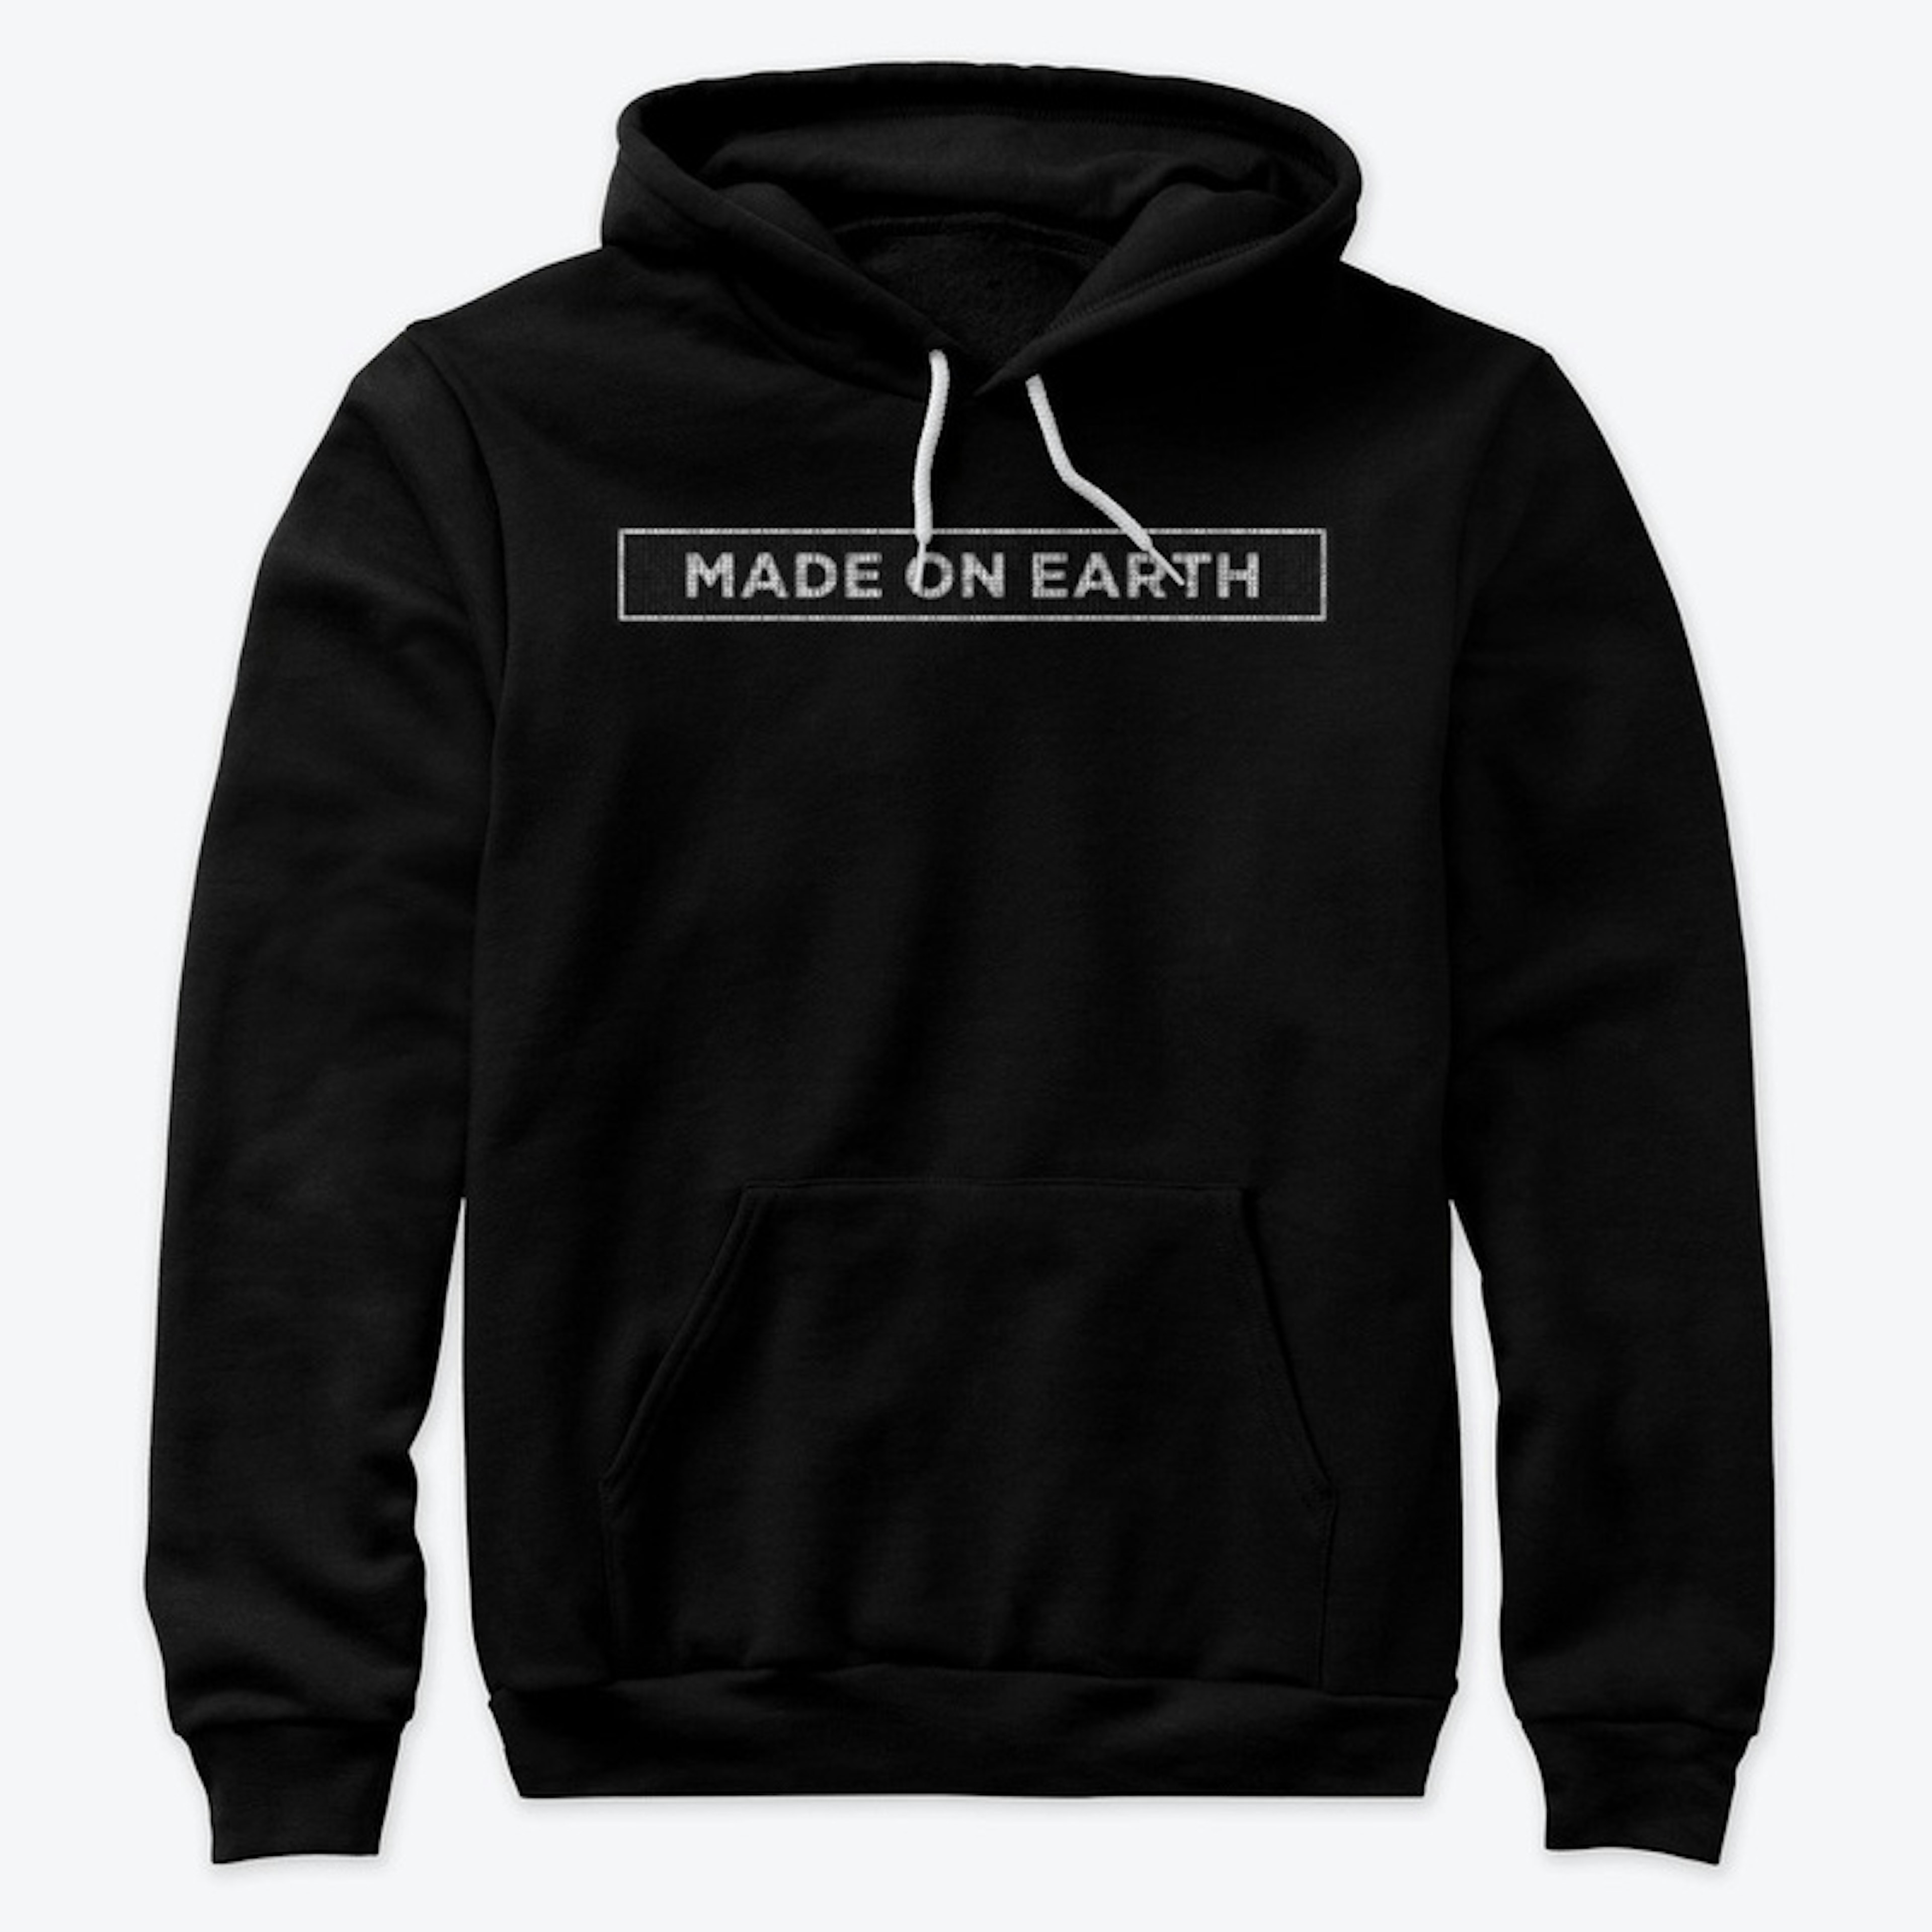 Made on Earth (black)